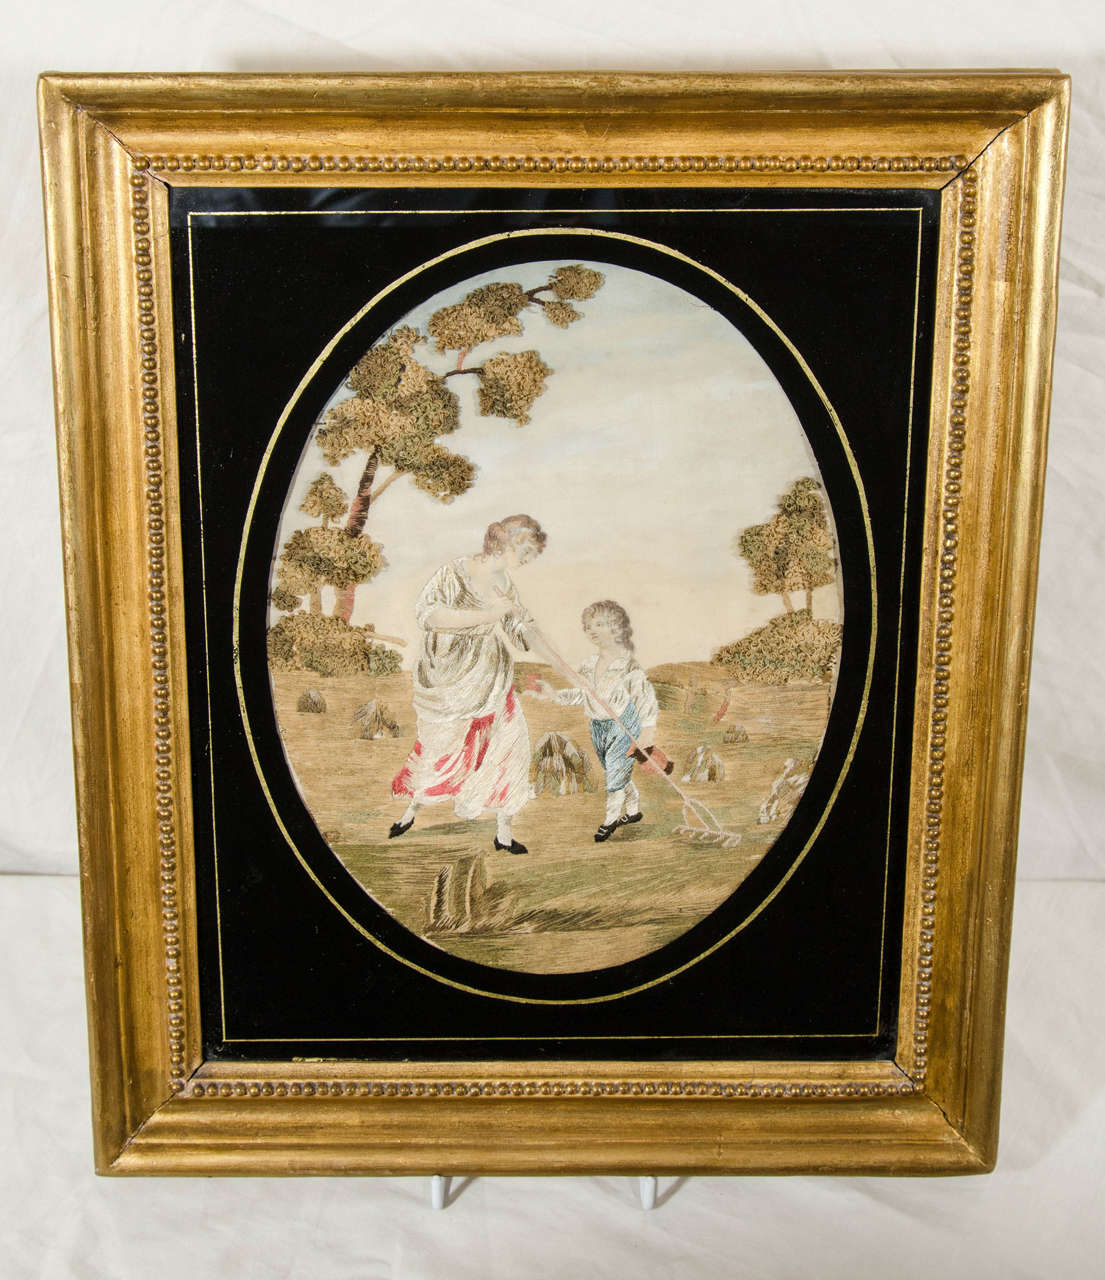 An English silk needlework embroidery in excellent condition and retaining good original colors. The needlework depicts a rural scene of a mother at work raking a field while her son brings her a bit of food and water. In one hand he carries a water